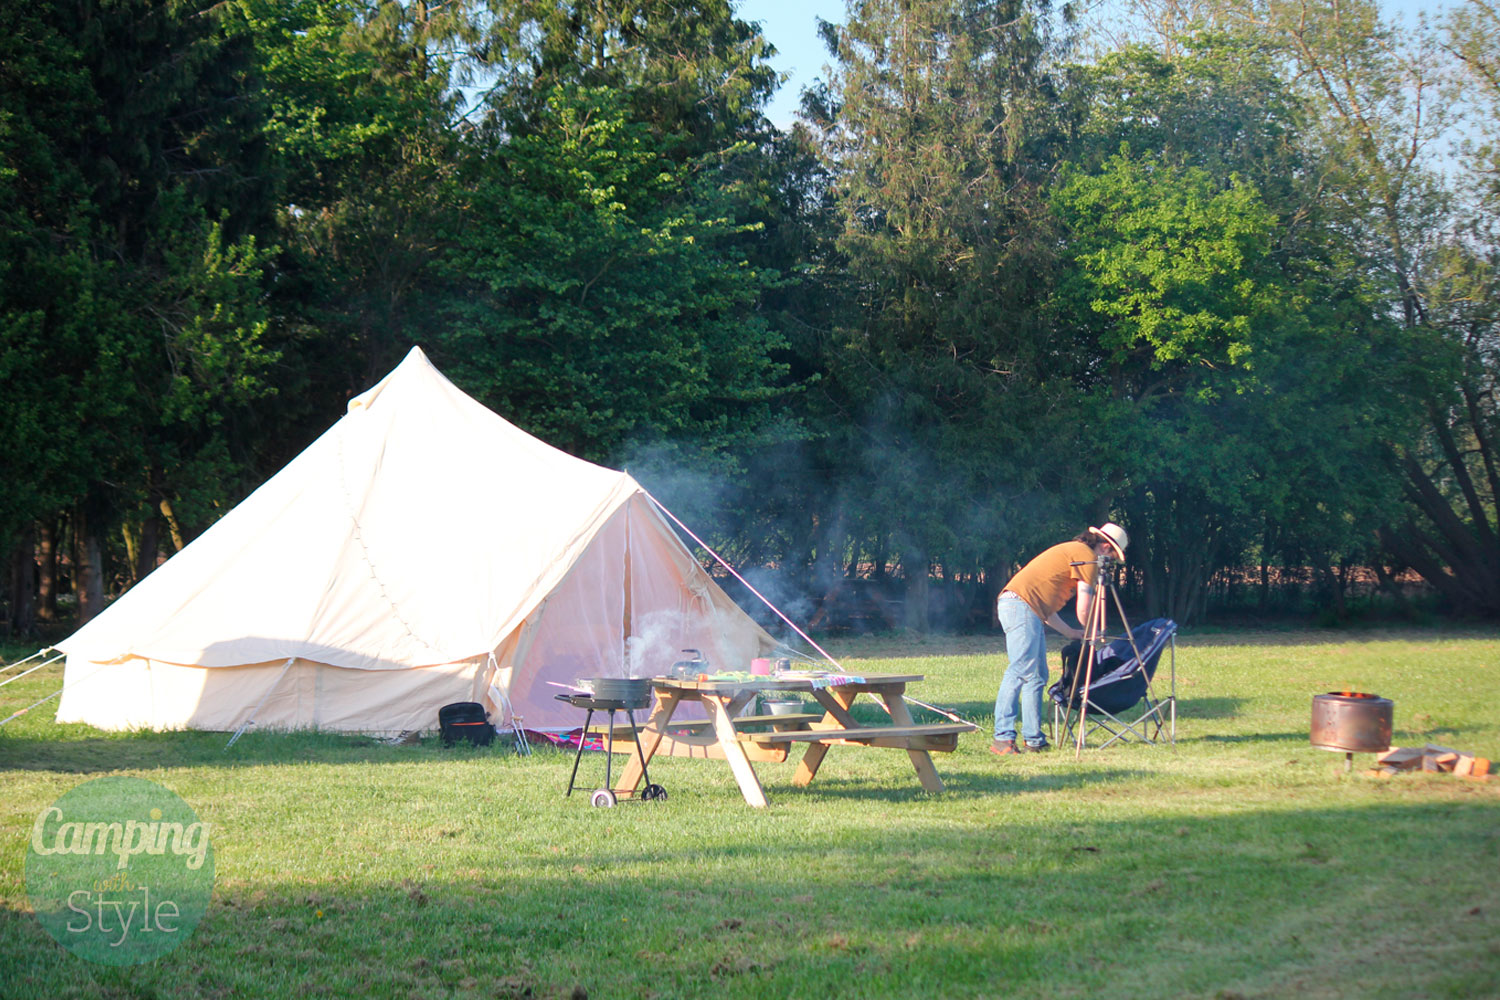 May Glamping at Canvas & Clover near the Malvern Hills